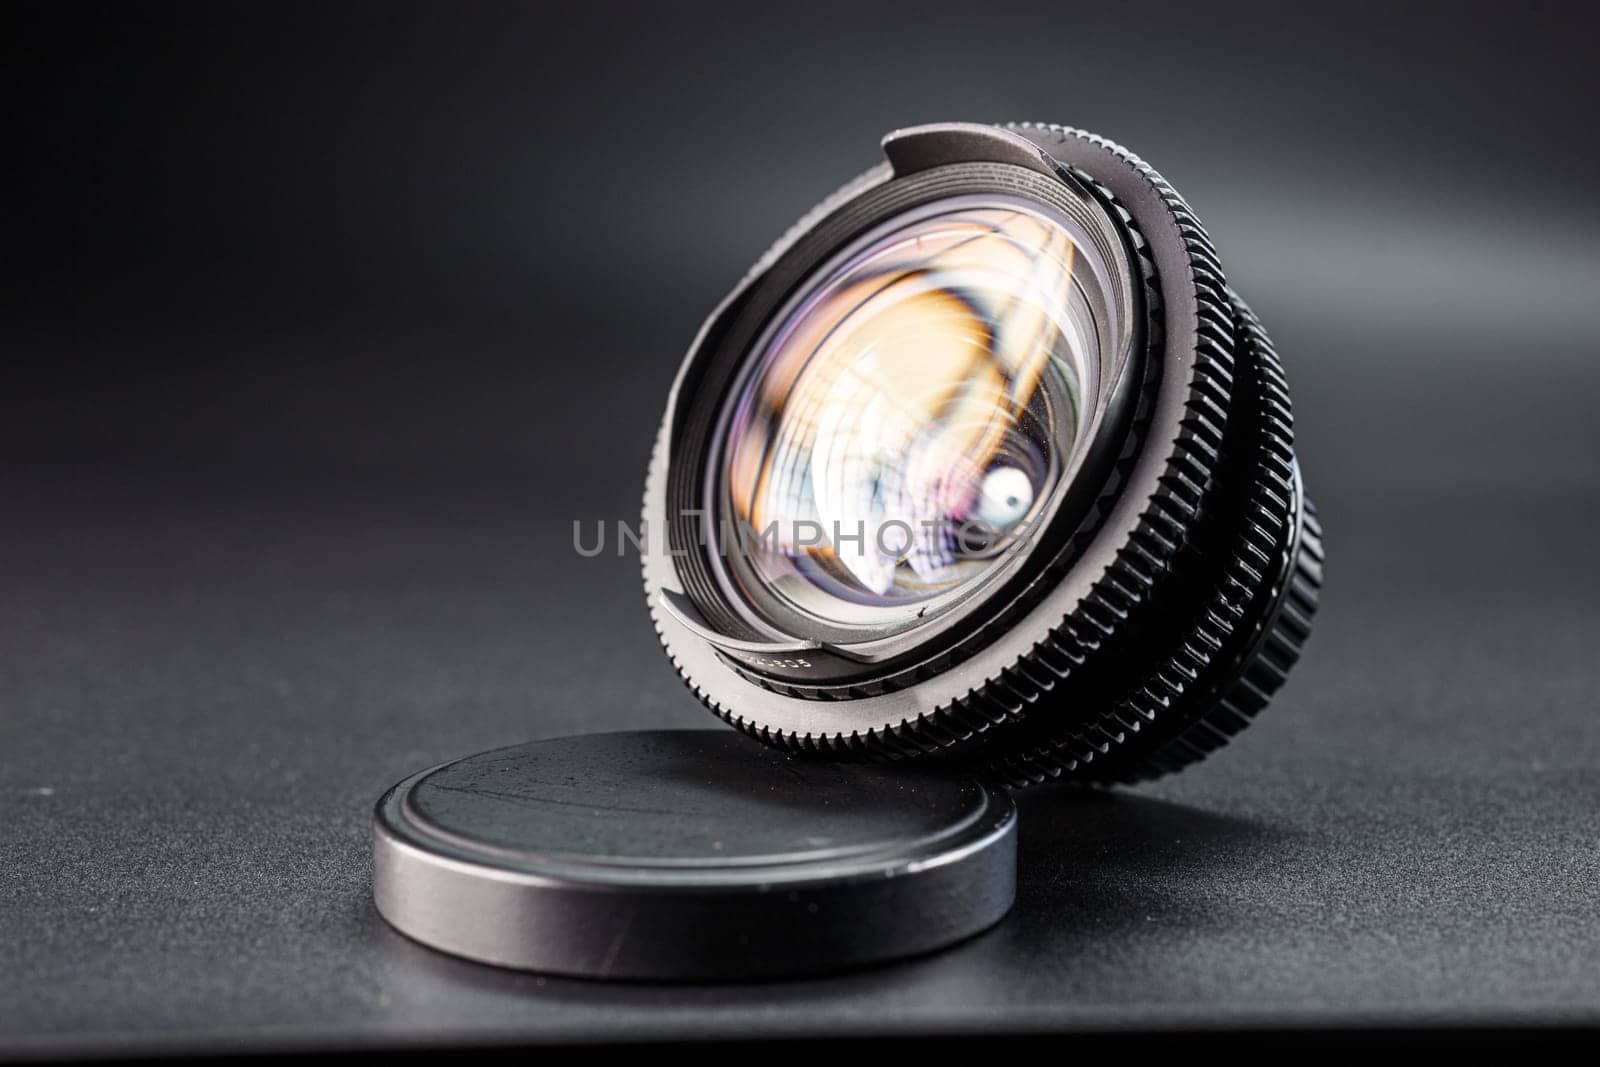 Artistic view of a vintage lens with vibrant reflections, focus on detailed ring textures, essential photography equipment on dark surface with lens cap